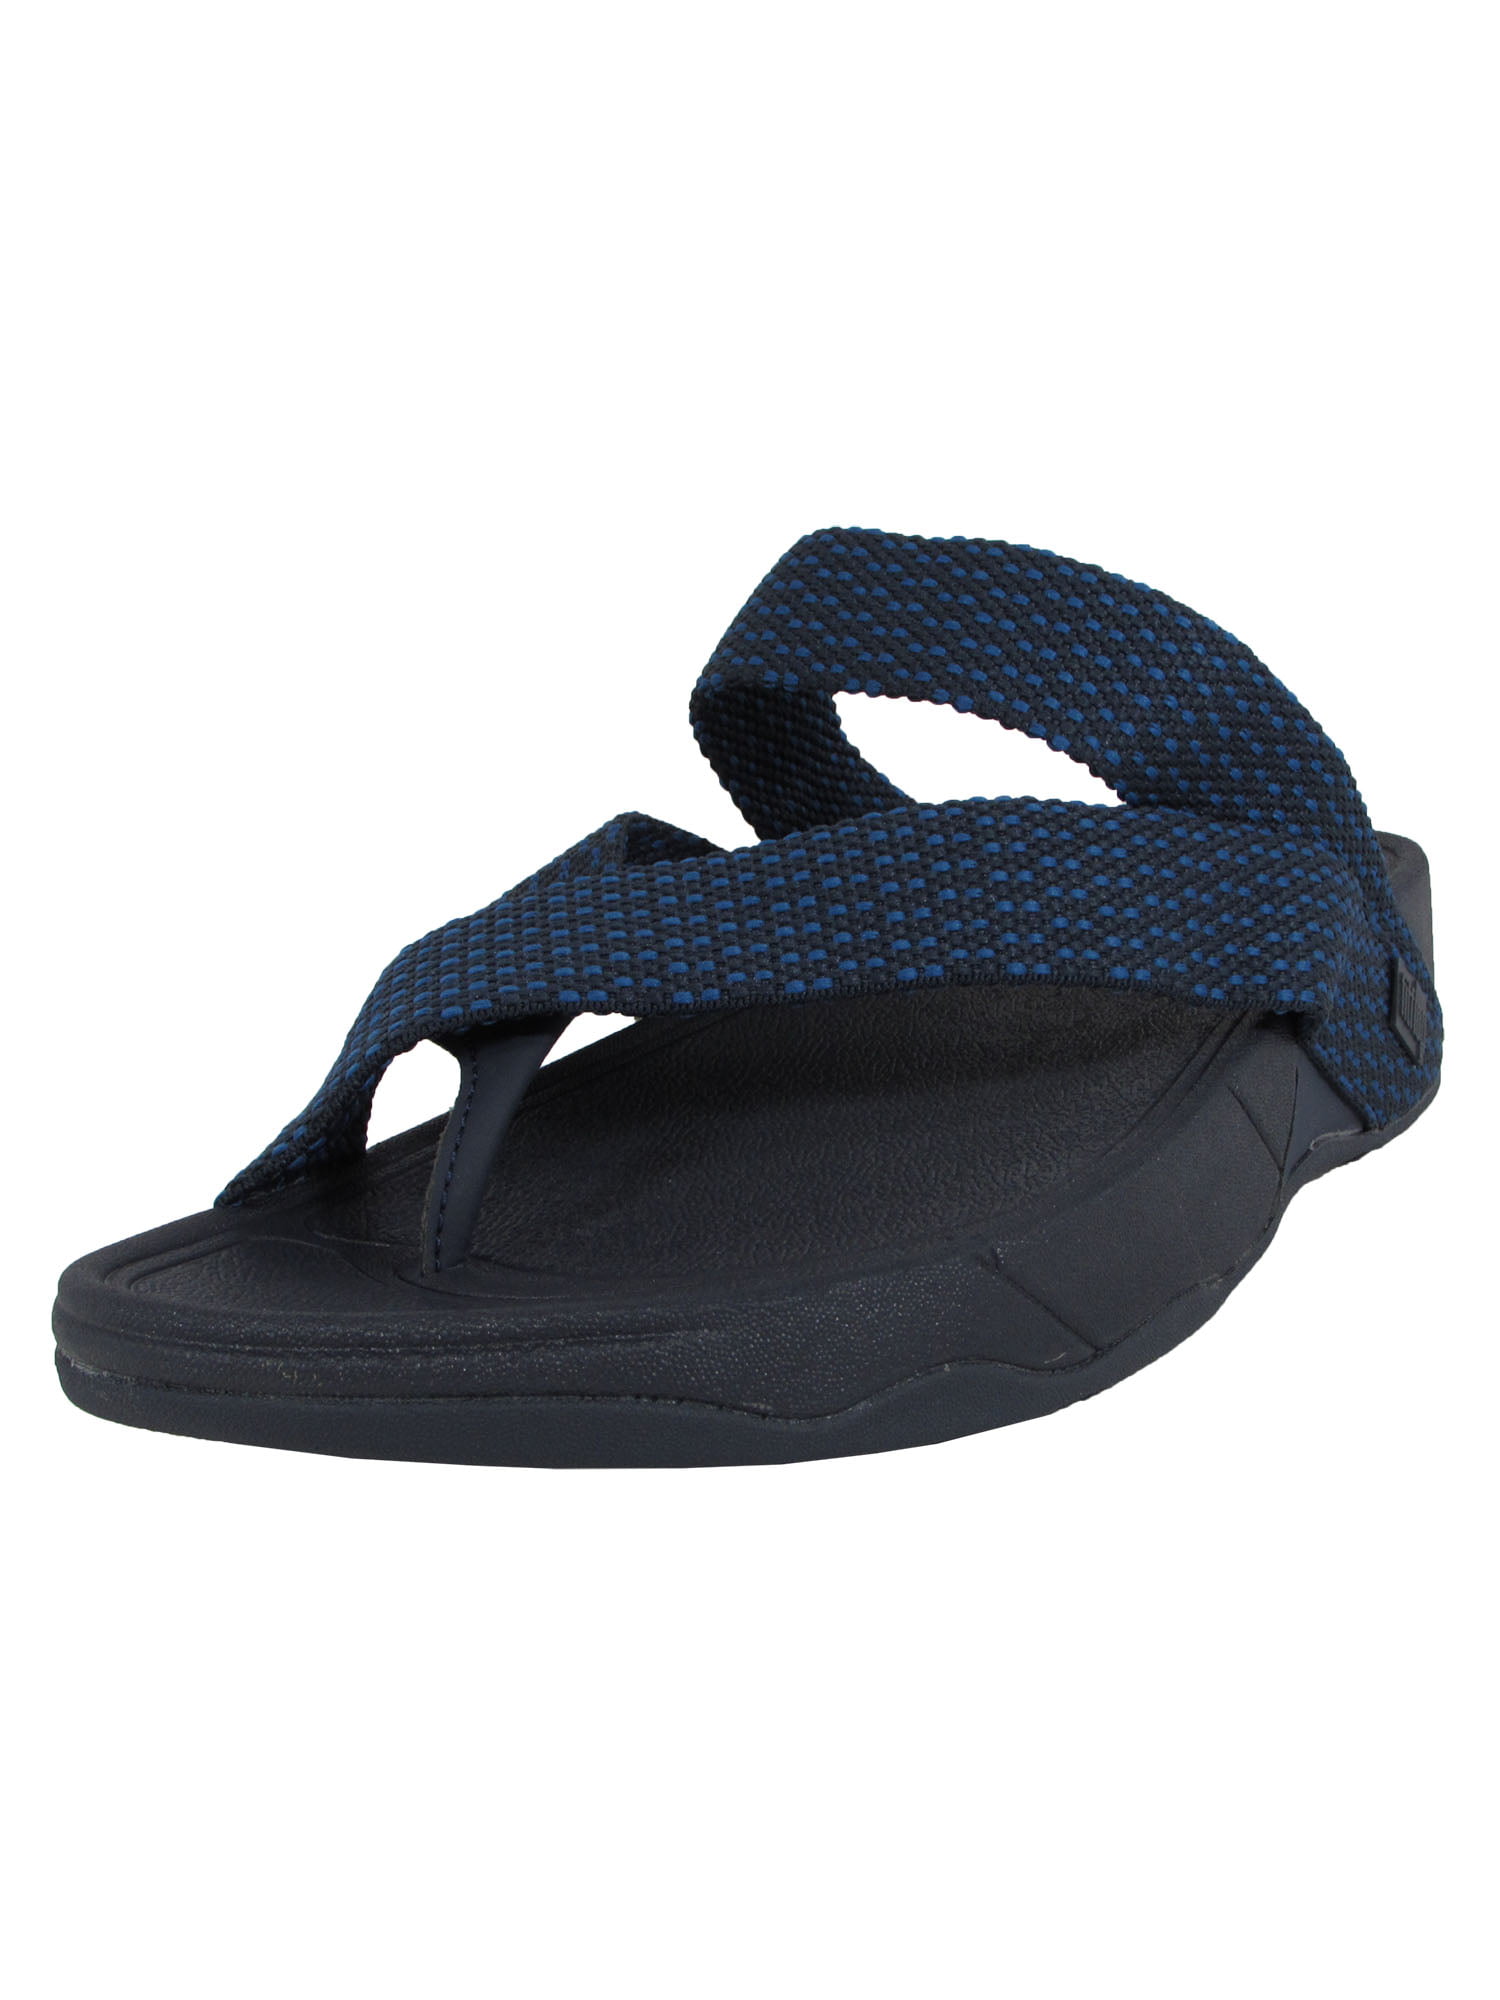 fitflop sling weave